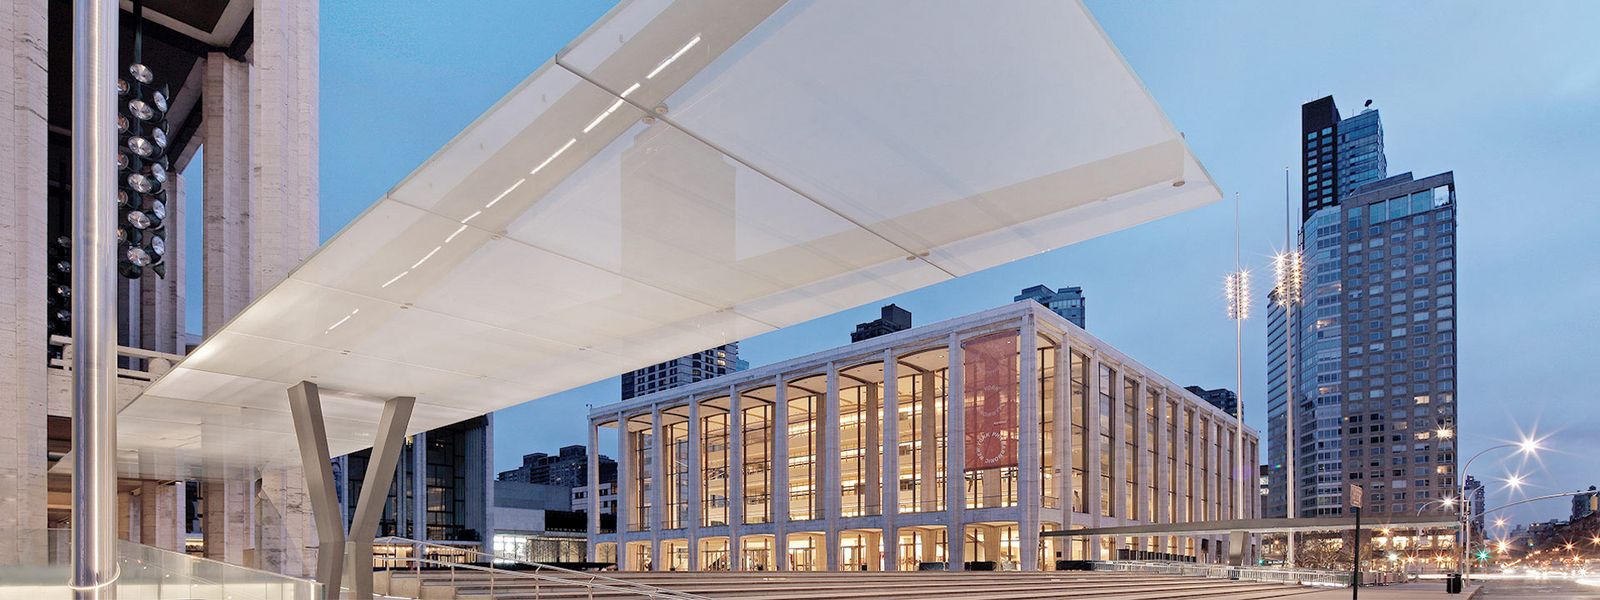 Glasdach - Lincoln Center Canopies